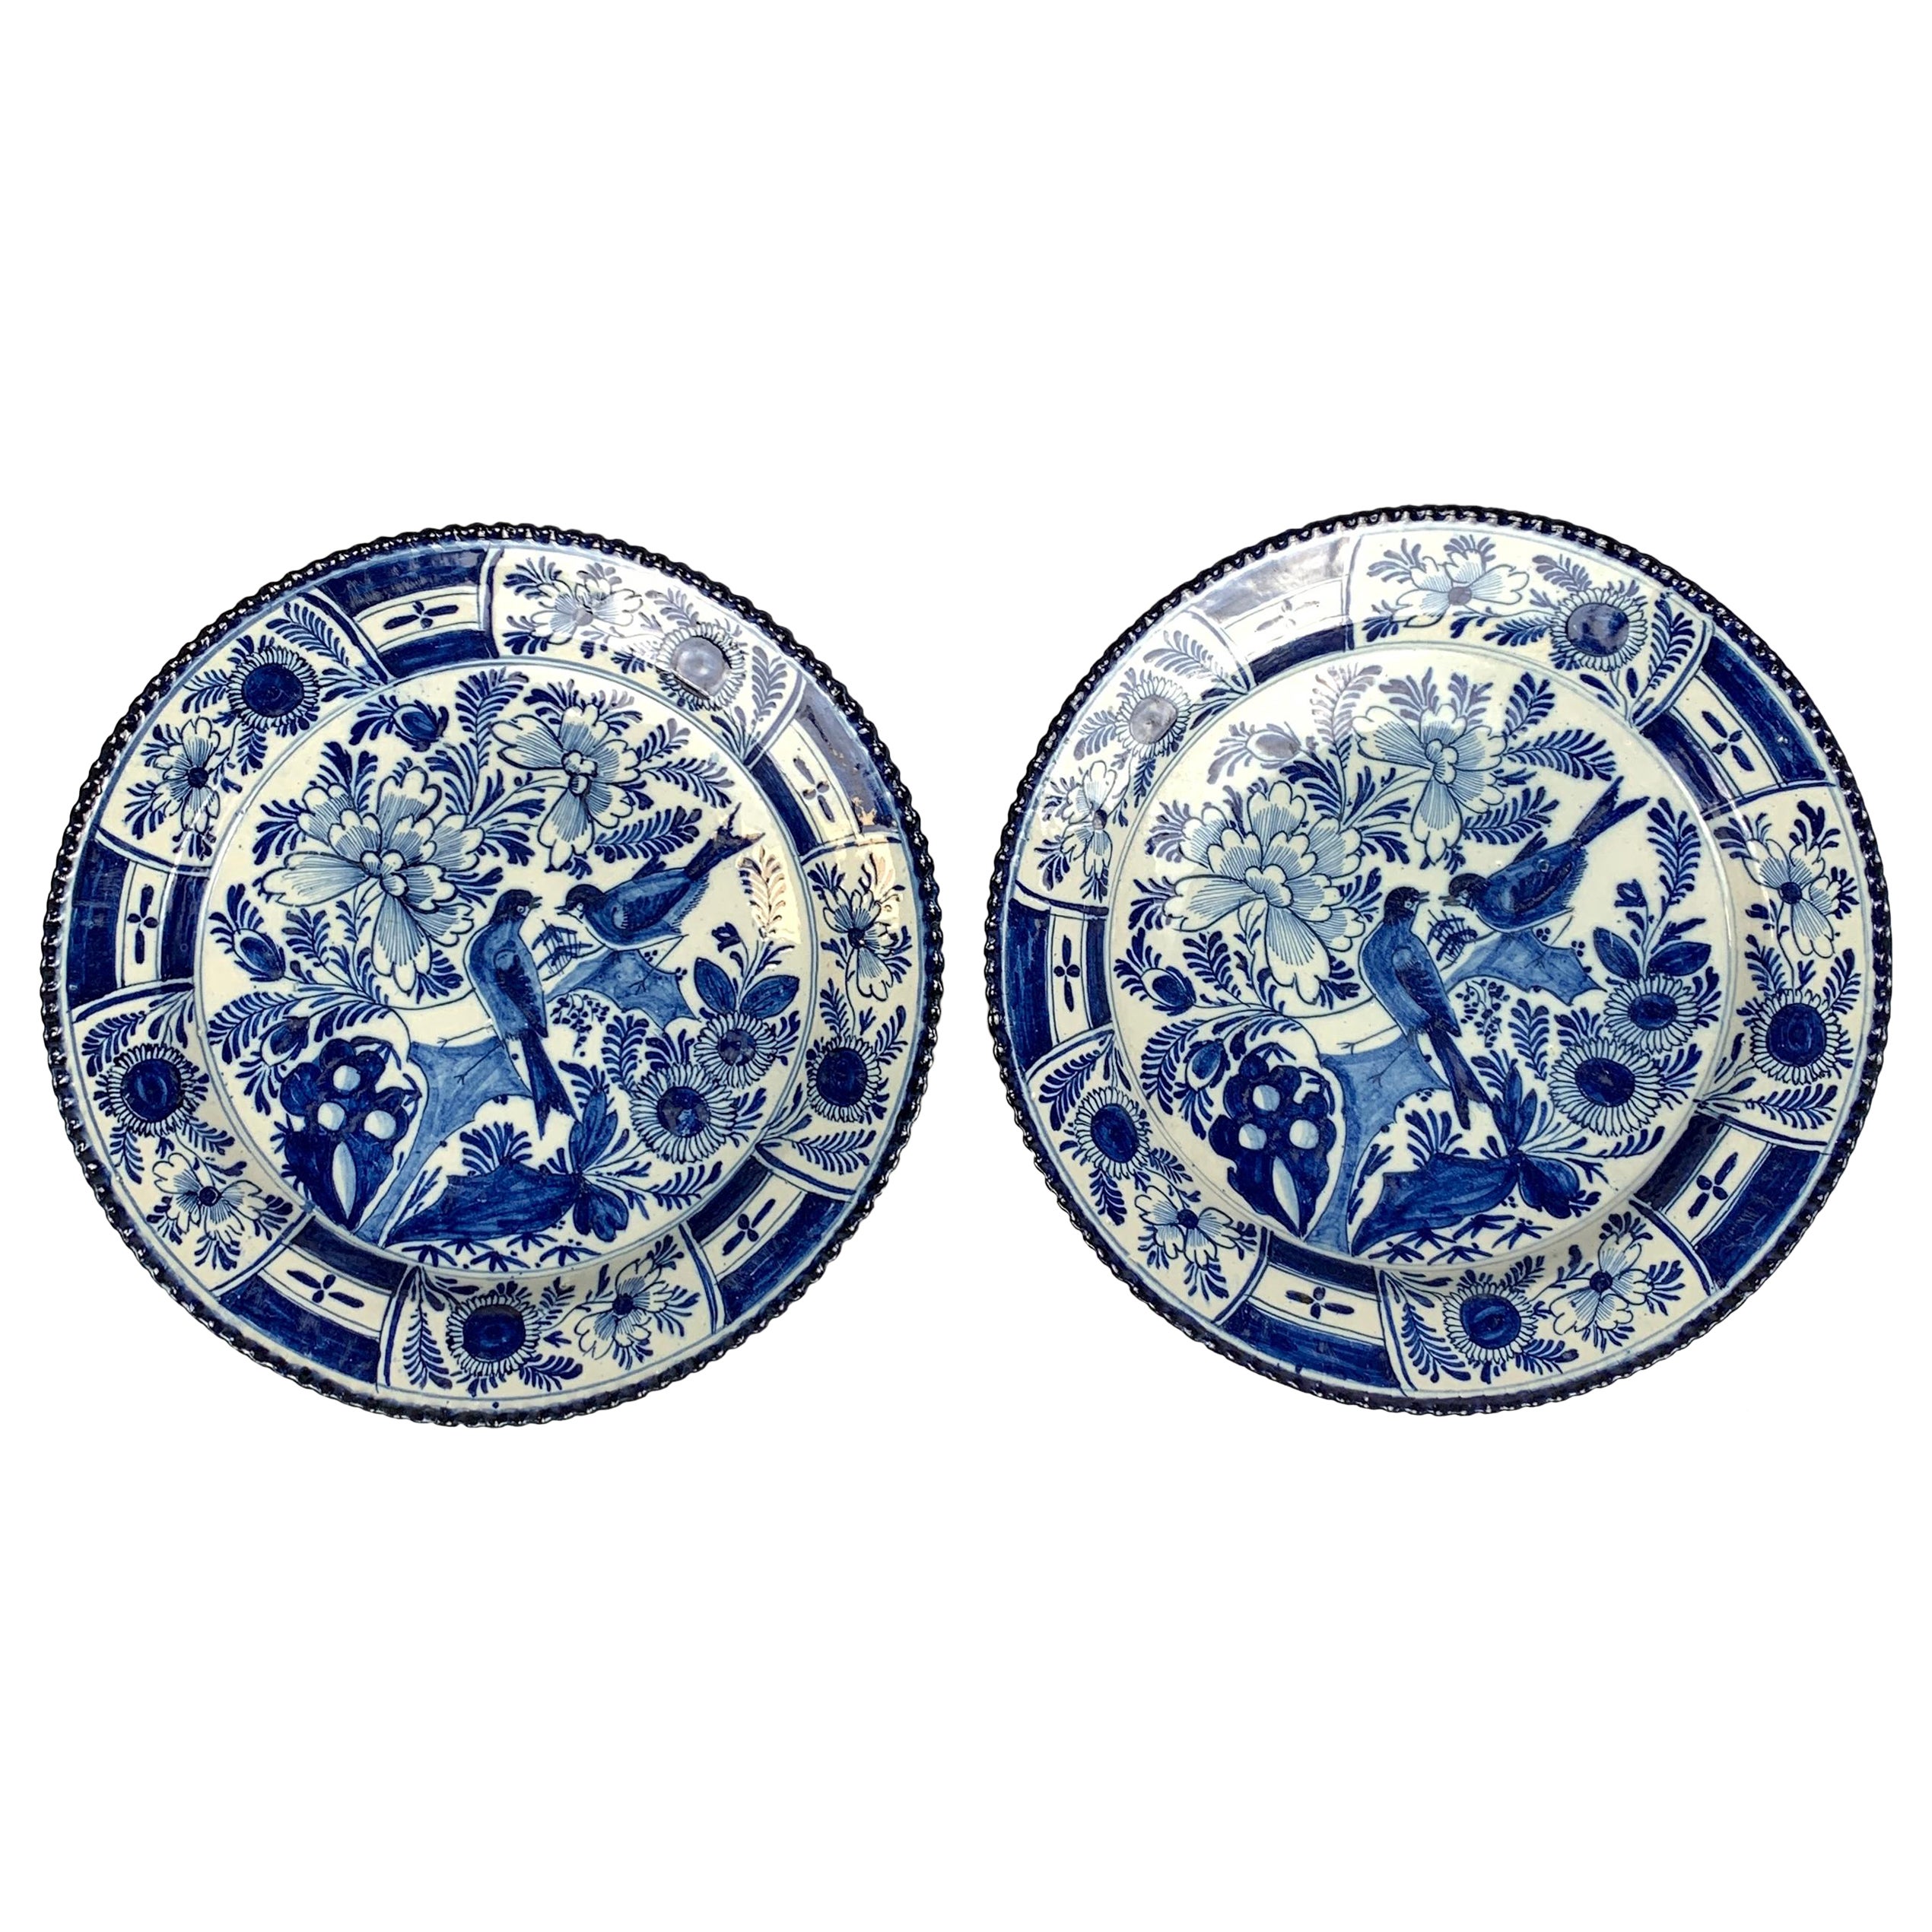 This pair of Dutch Delft blue and white chargers were hand-painted in the last quarter of the 18th century, circa 1780.
They feature beautiful long-tailed songbirds resting on a branch among flowers and rockwork.
The garden is filled with exquisite